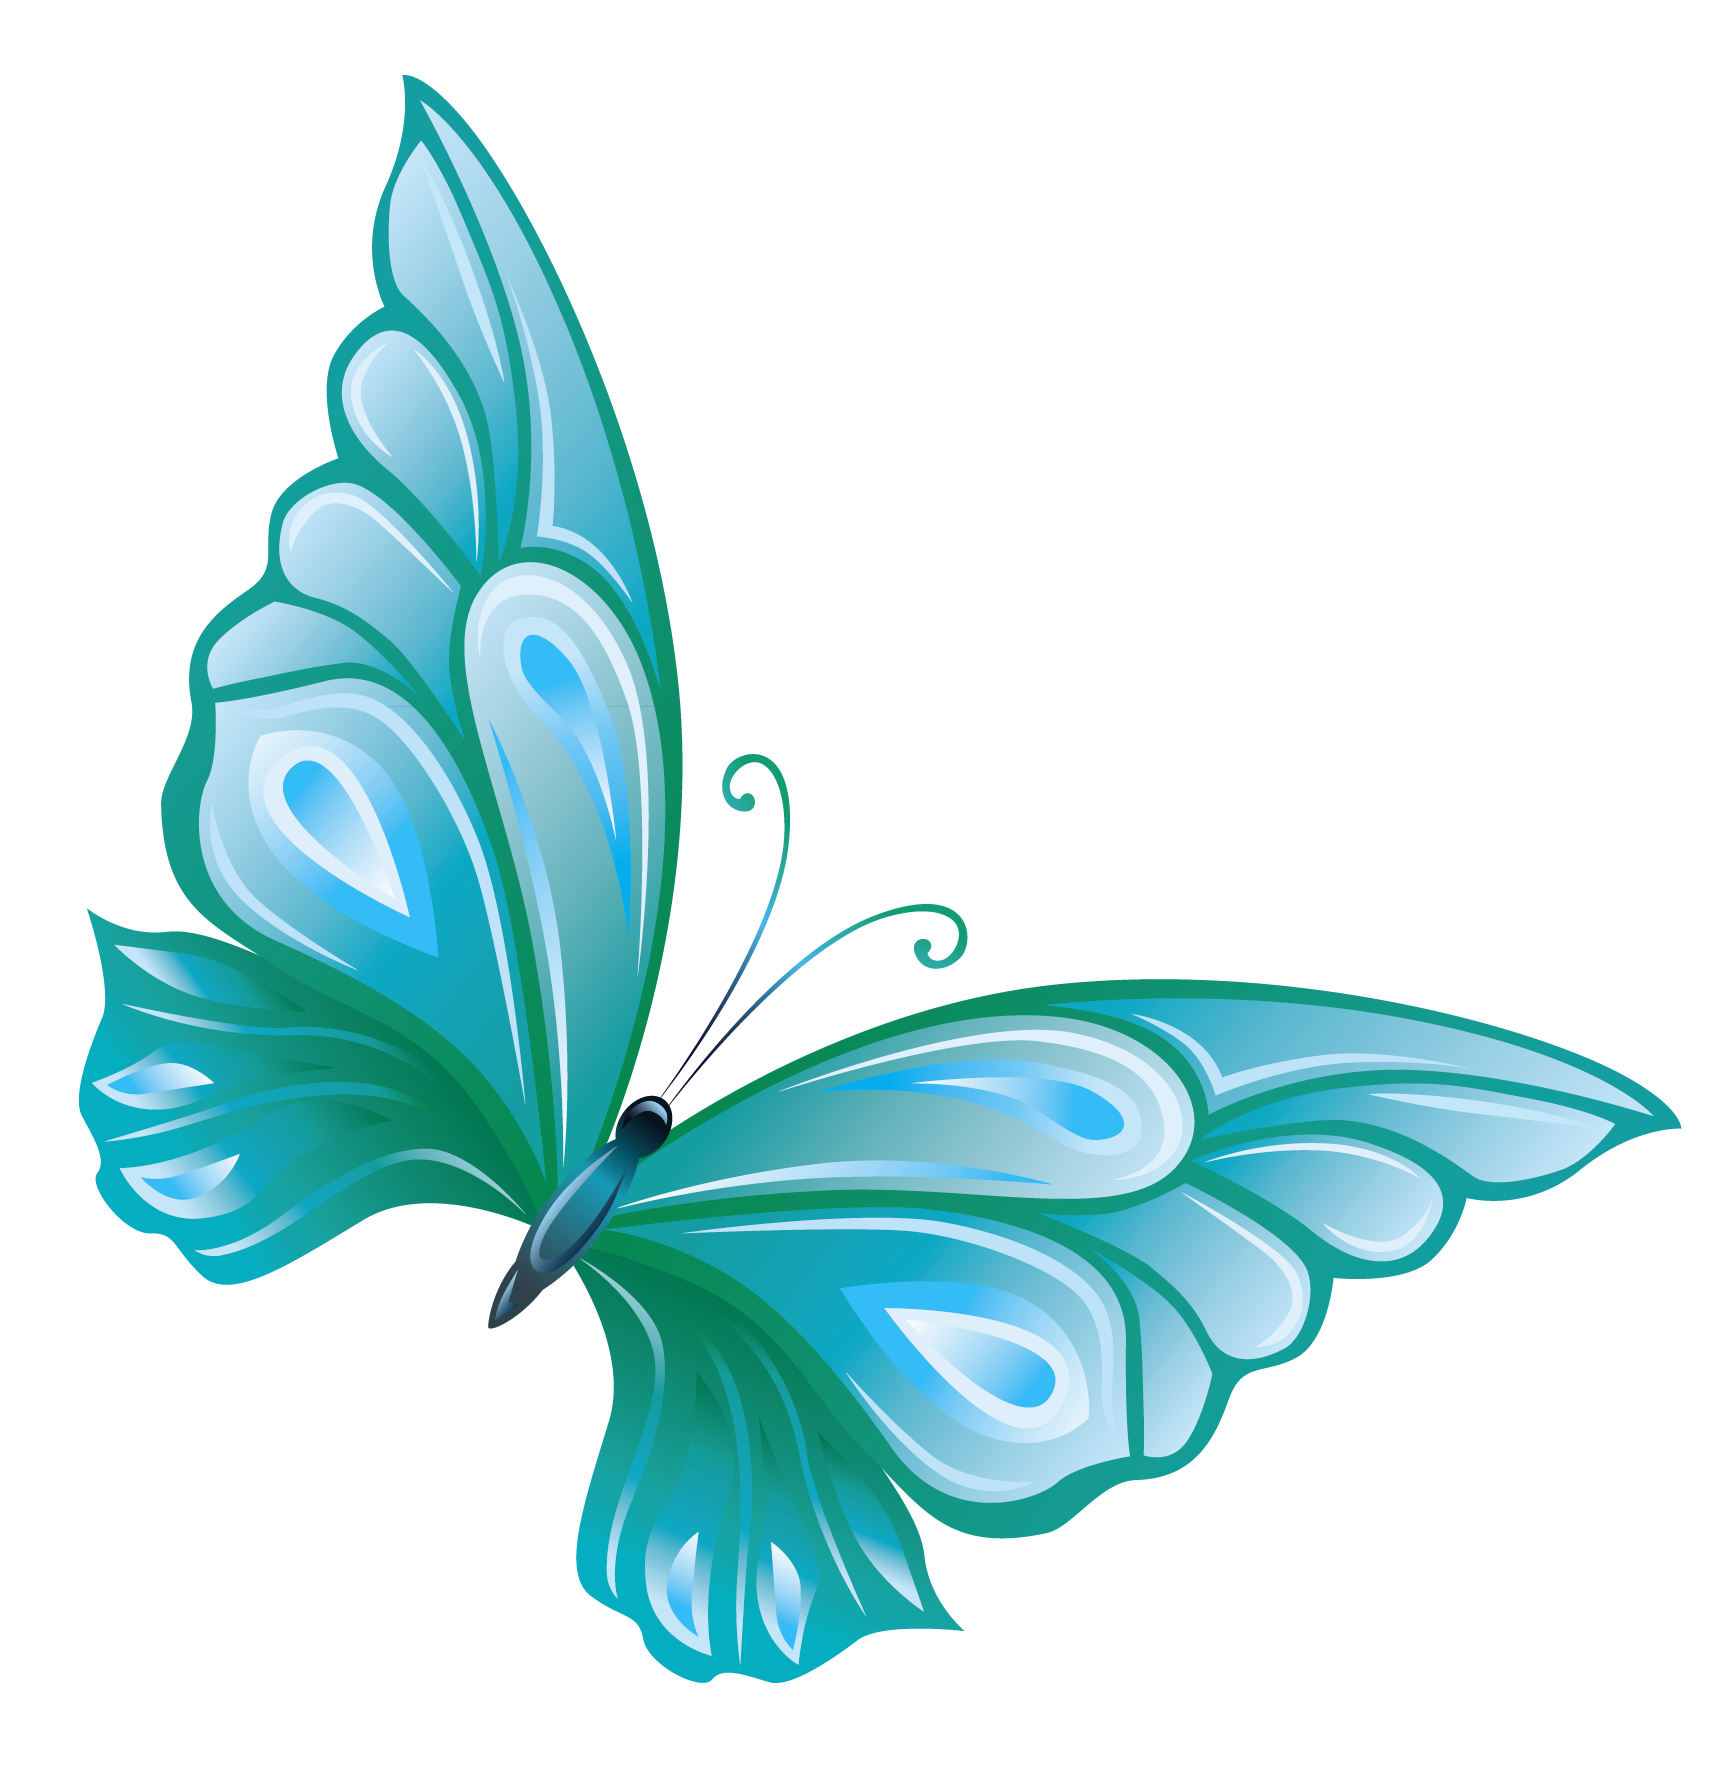 Butterfly Clip art - Transparent Blue Butterfly PNG Clipart png ...